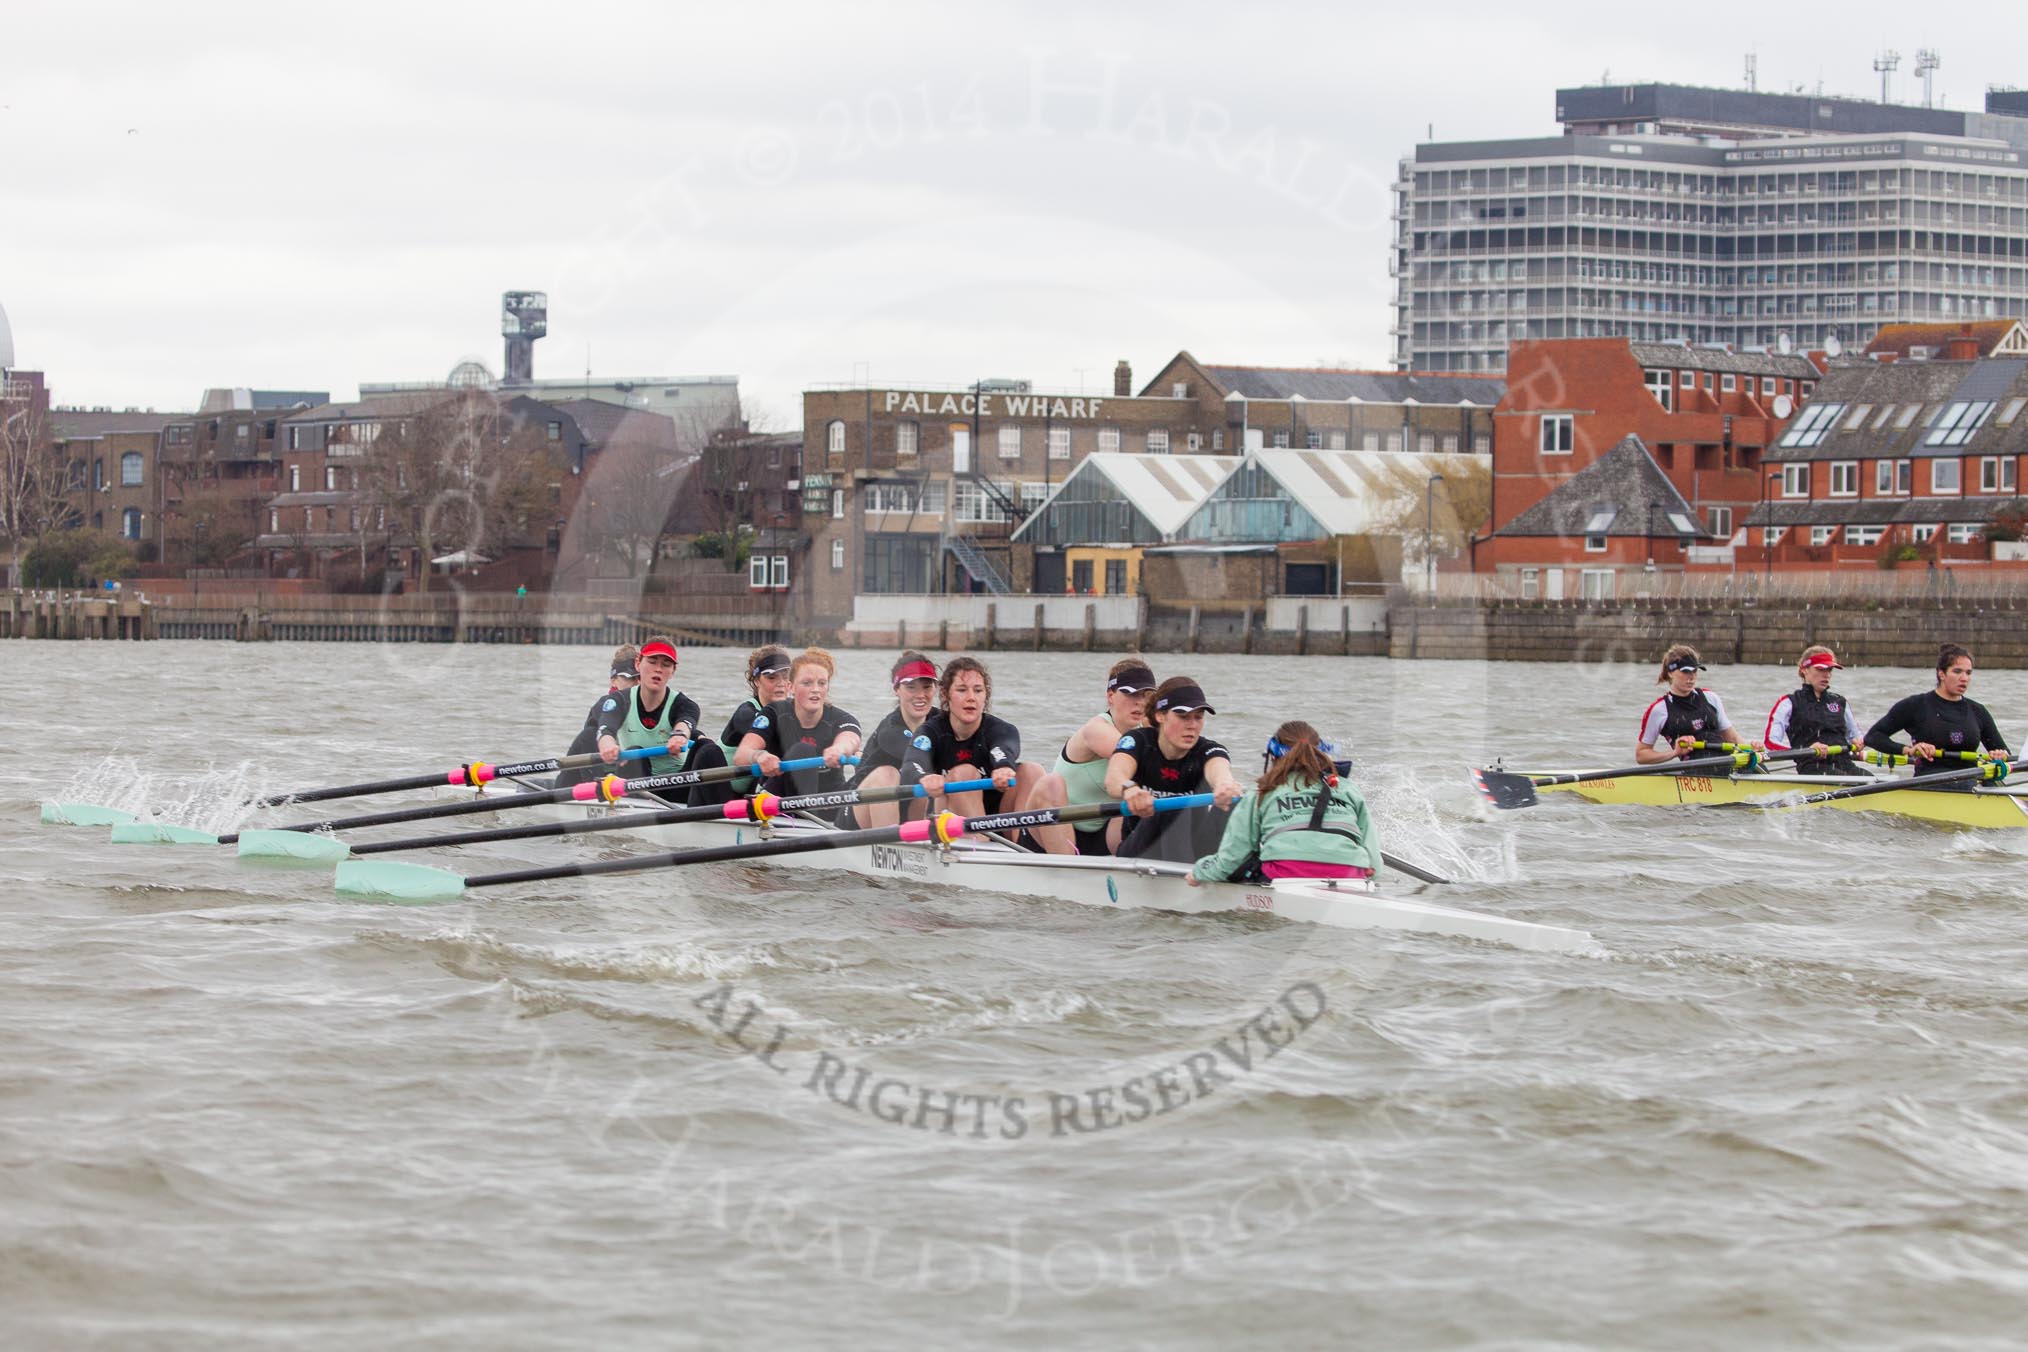 The Boat Race season 2014 - fixture CUWBC vs Thames RC.




on 02 March 2014 at 14:00, image #163